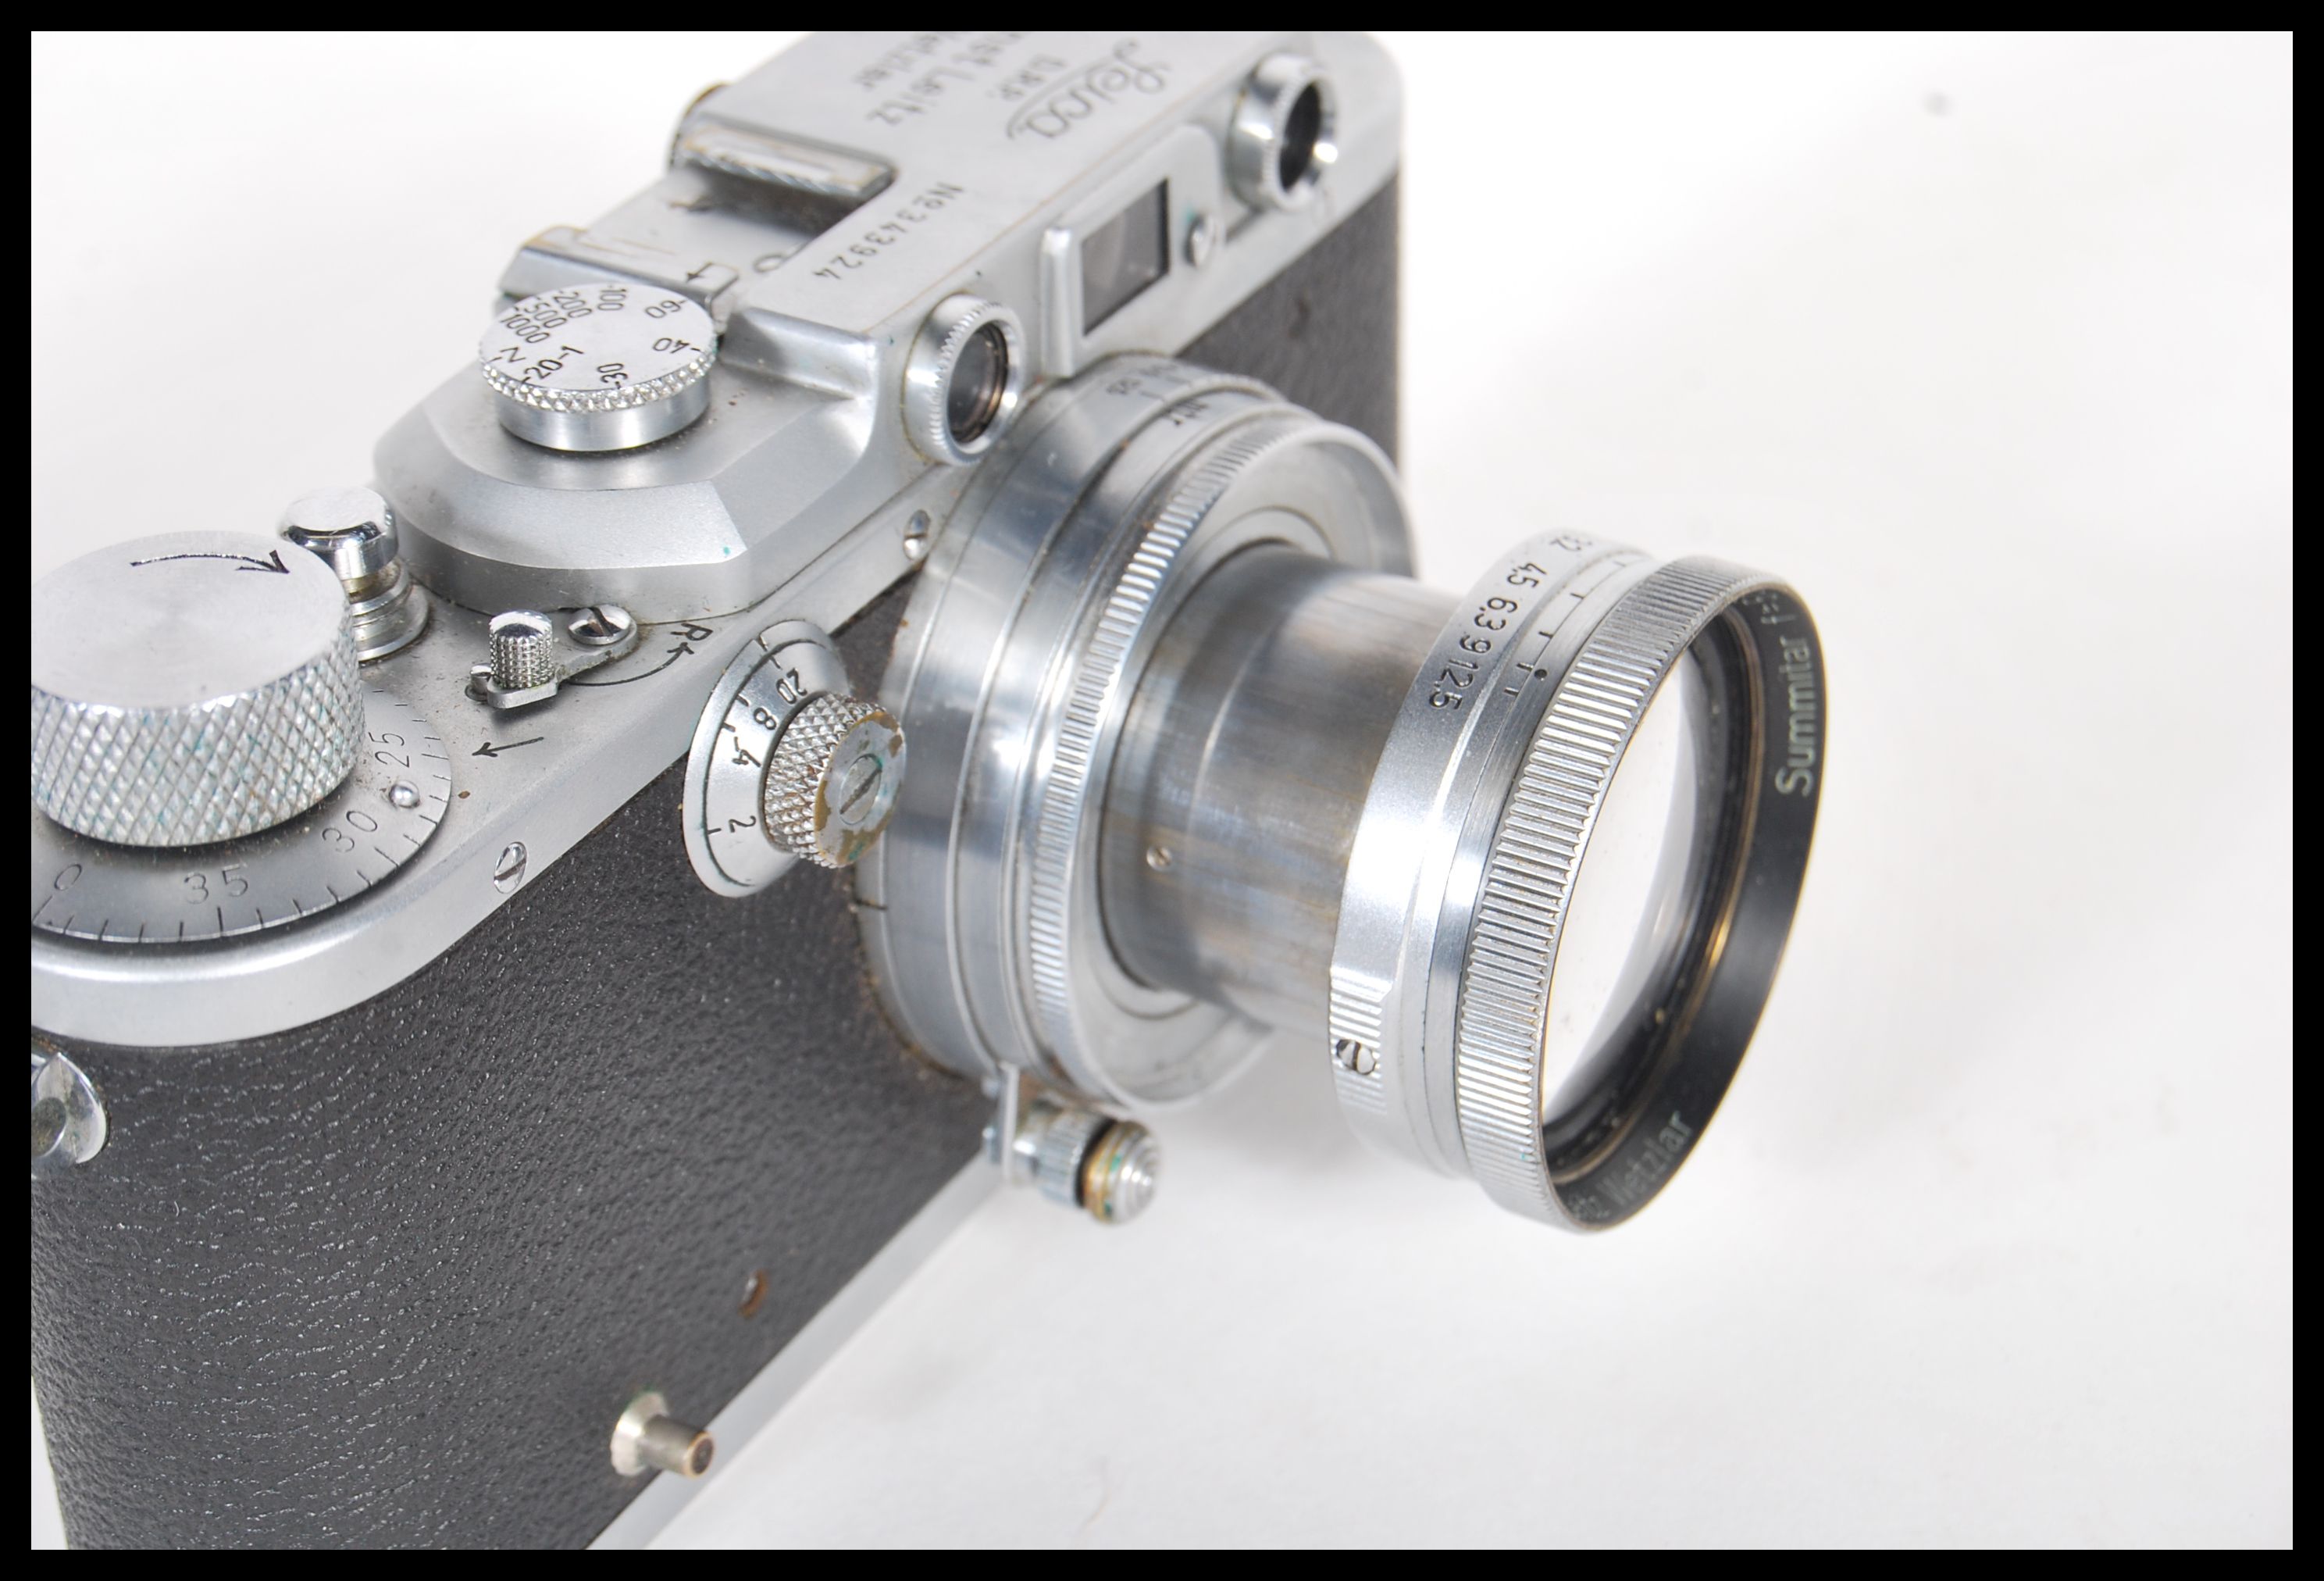 A Leica lll D.P.R Rangefinder chrome camera by Ernst Leitz Wetzlar Germany, Serial number 343924. - Image 6 of 7